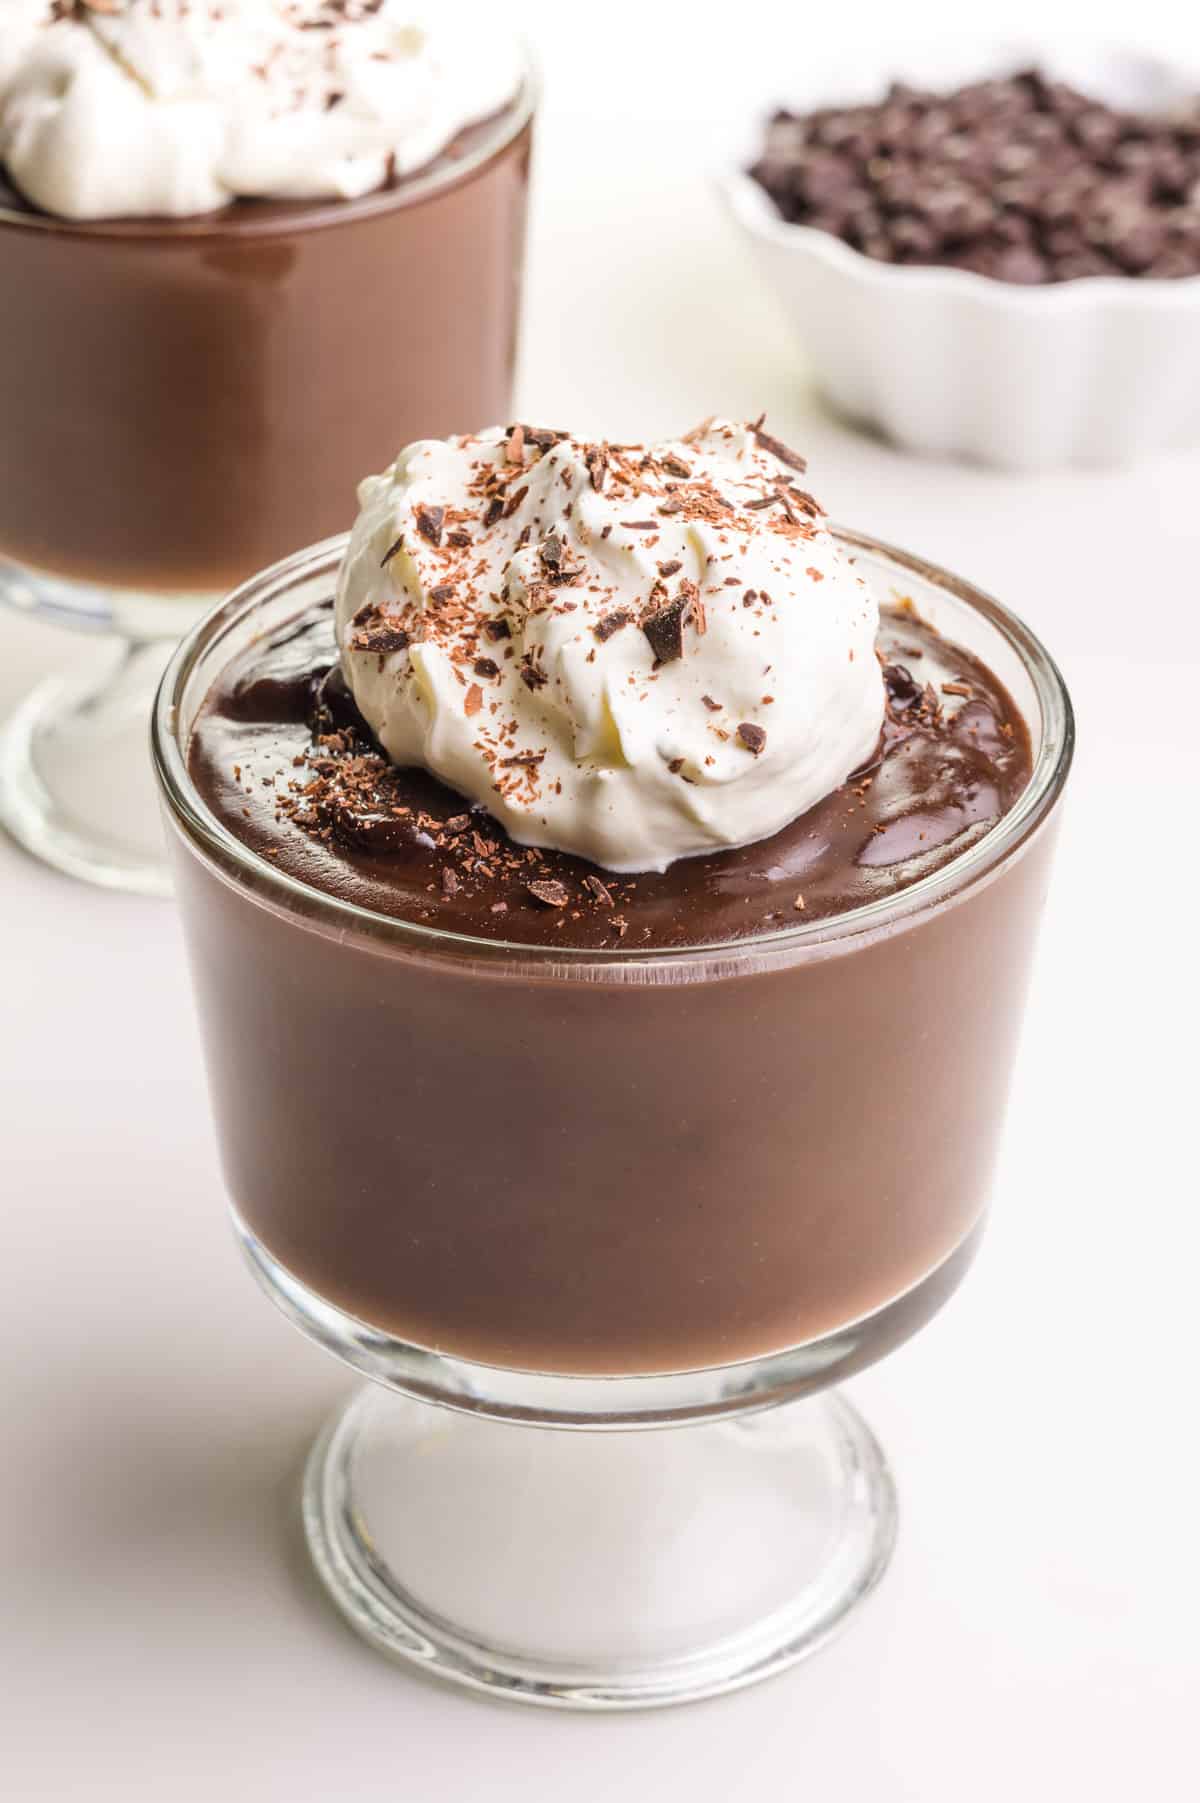 A bowl of vegan chocolate pudding has whipped cream on top. It sits in front of another bowl of pudding and a bowl of chocolate chips.